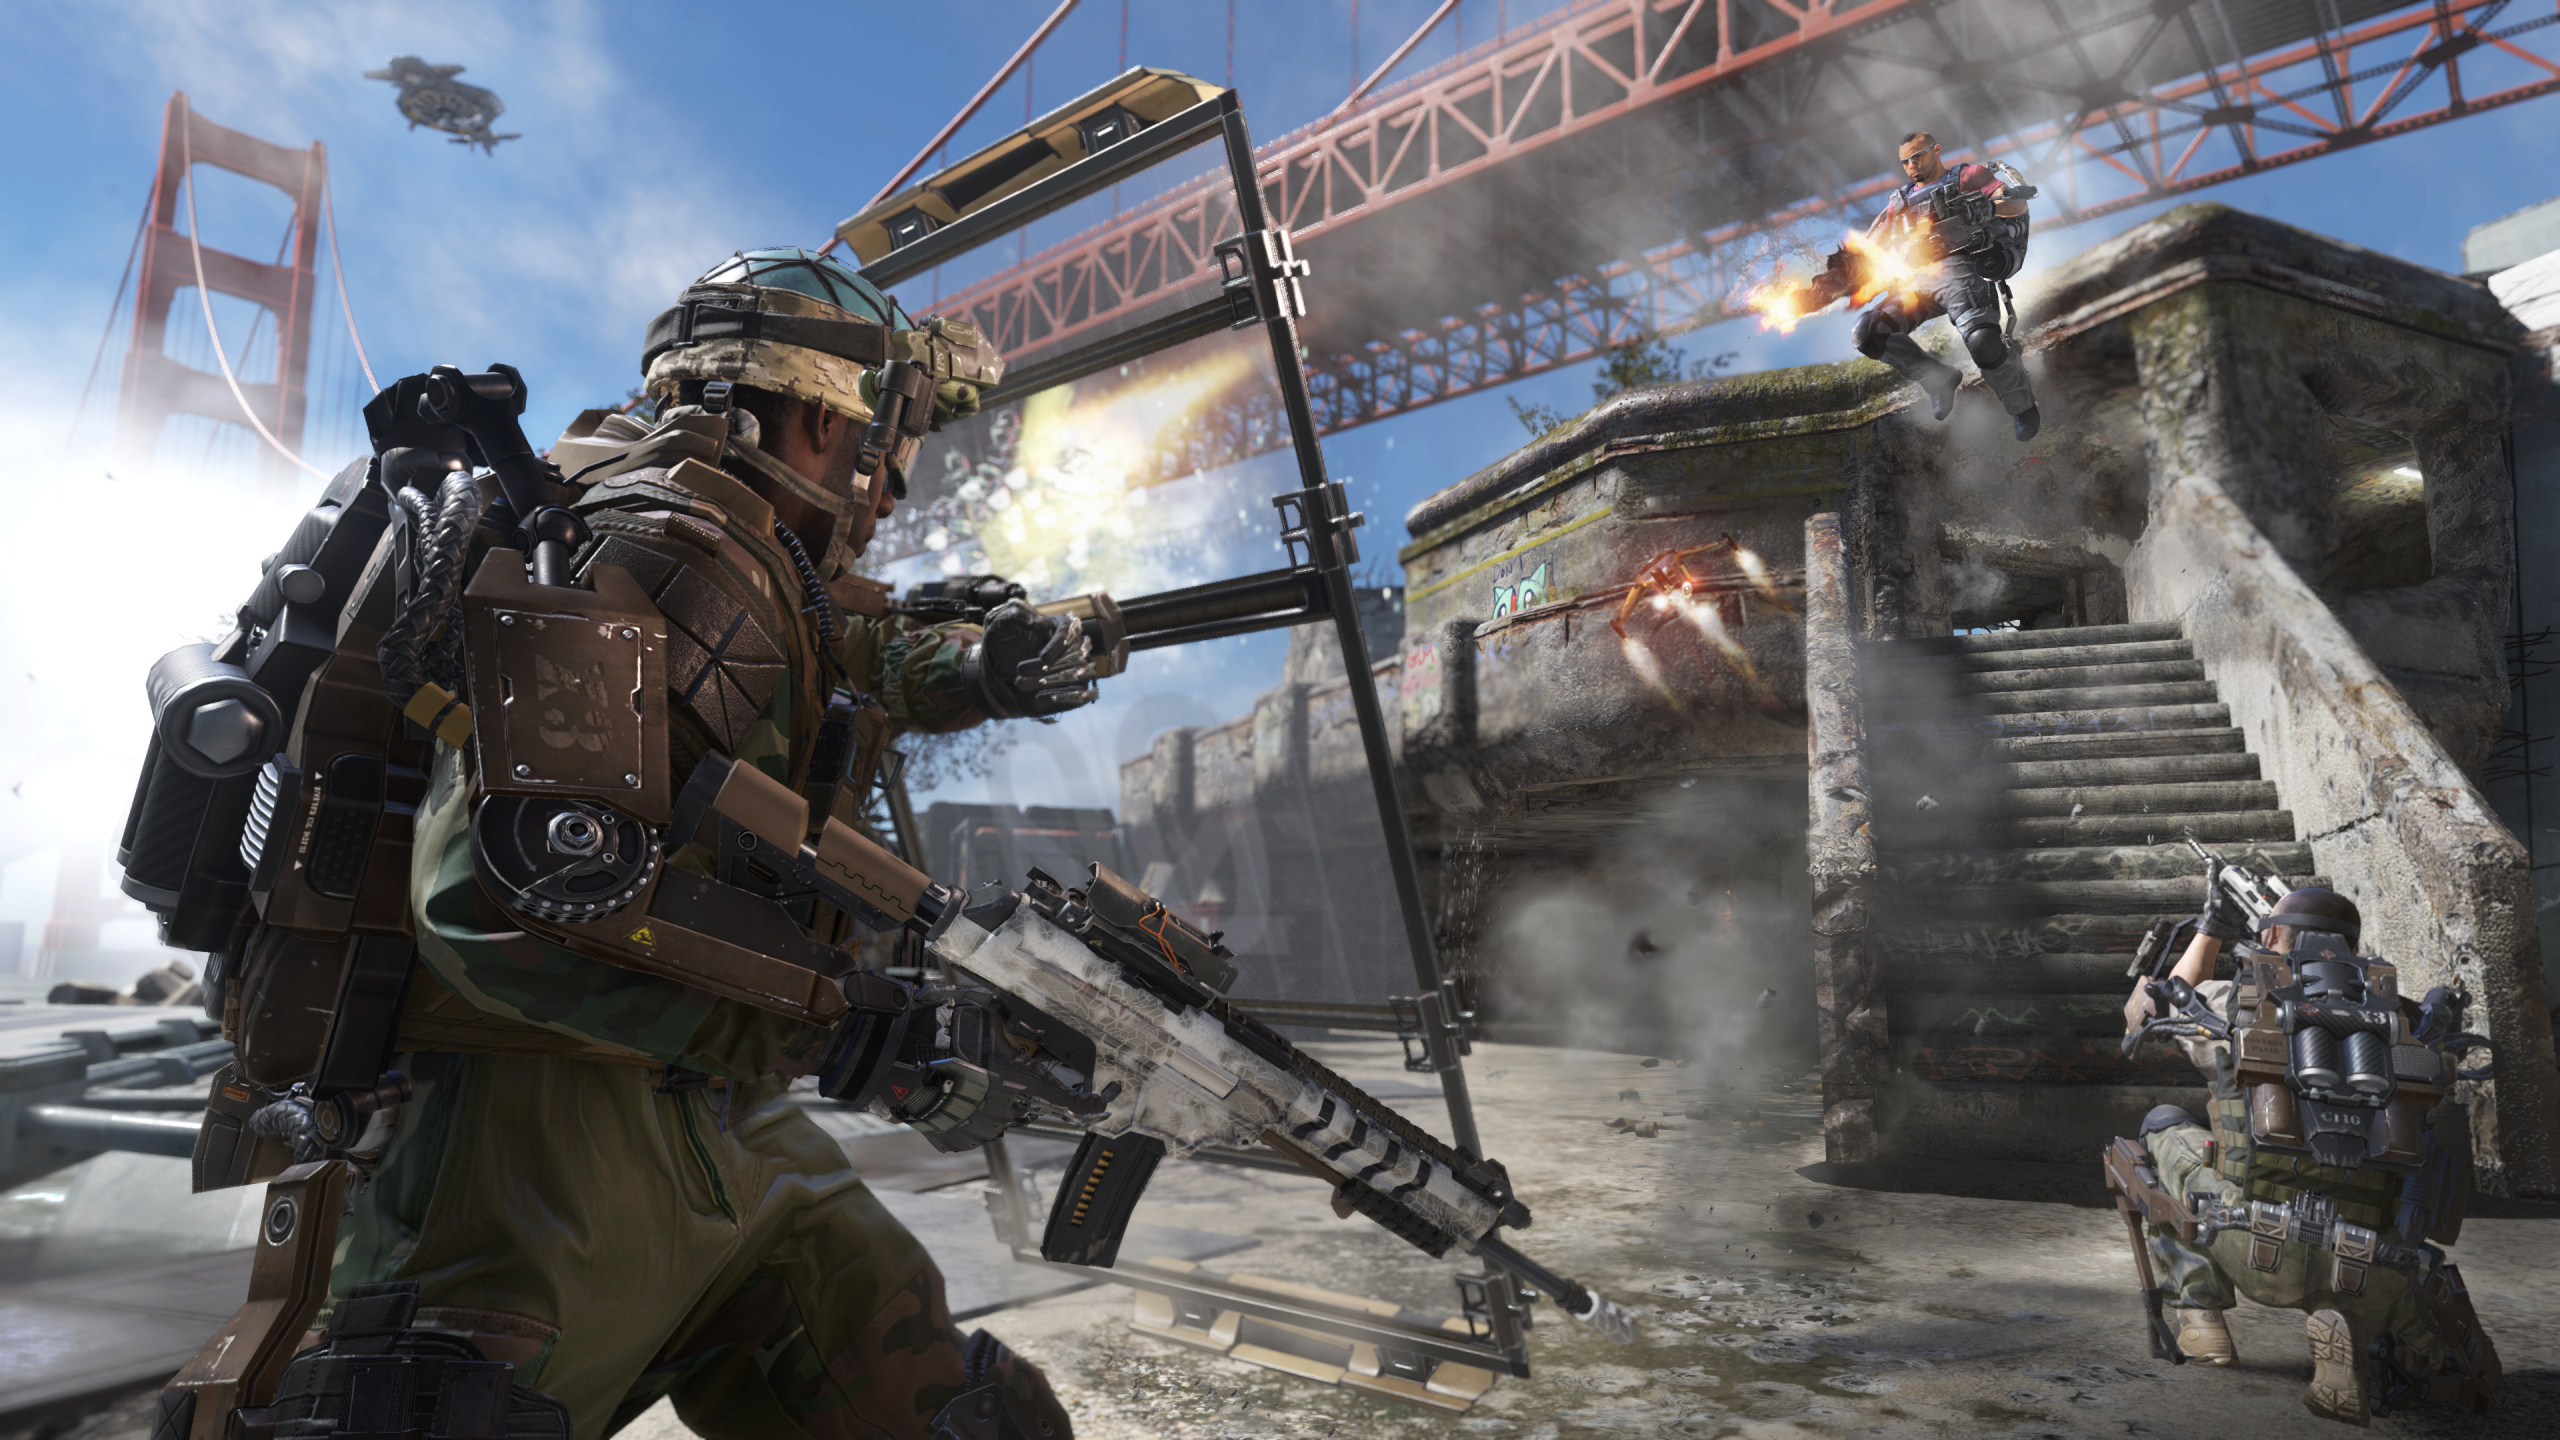 Call of Duty Advanced Warfare, Multiplayer Video Game, pc Game, Soldier, Military. Wallpaper in 2560x1440 Resolution